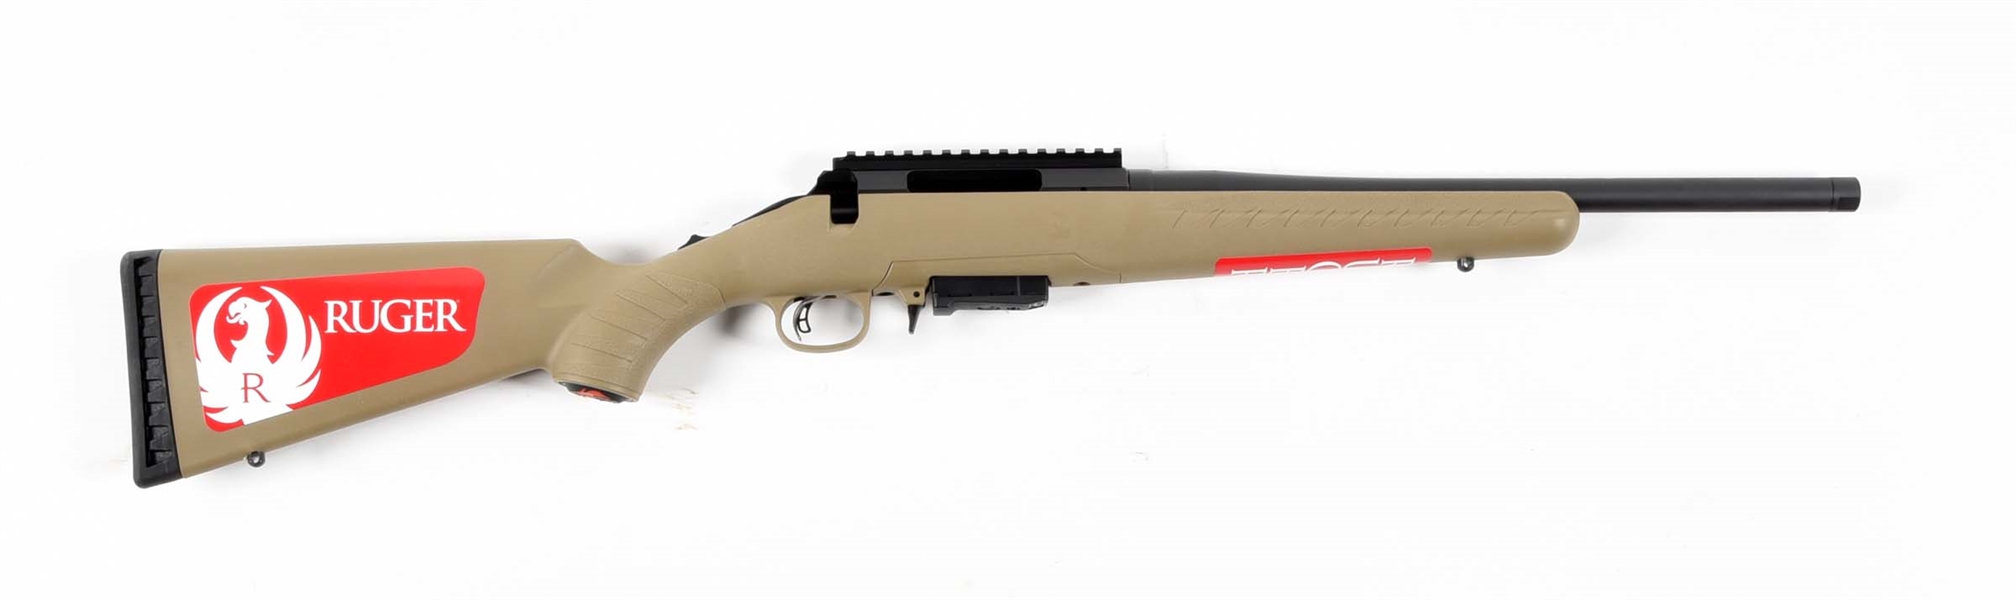 (M) RUGER AMERICAN RANCH RIFLE BOLT ACTION RIFLE IN 7.62X39MM.